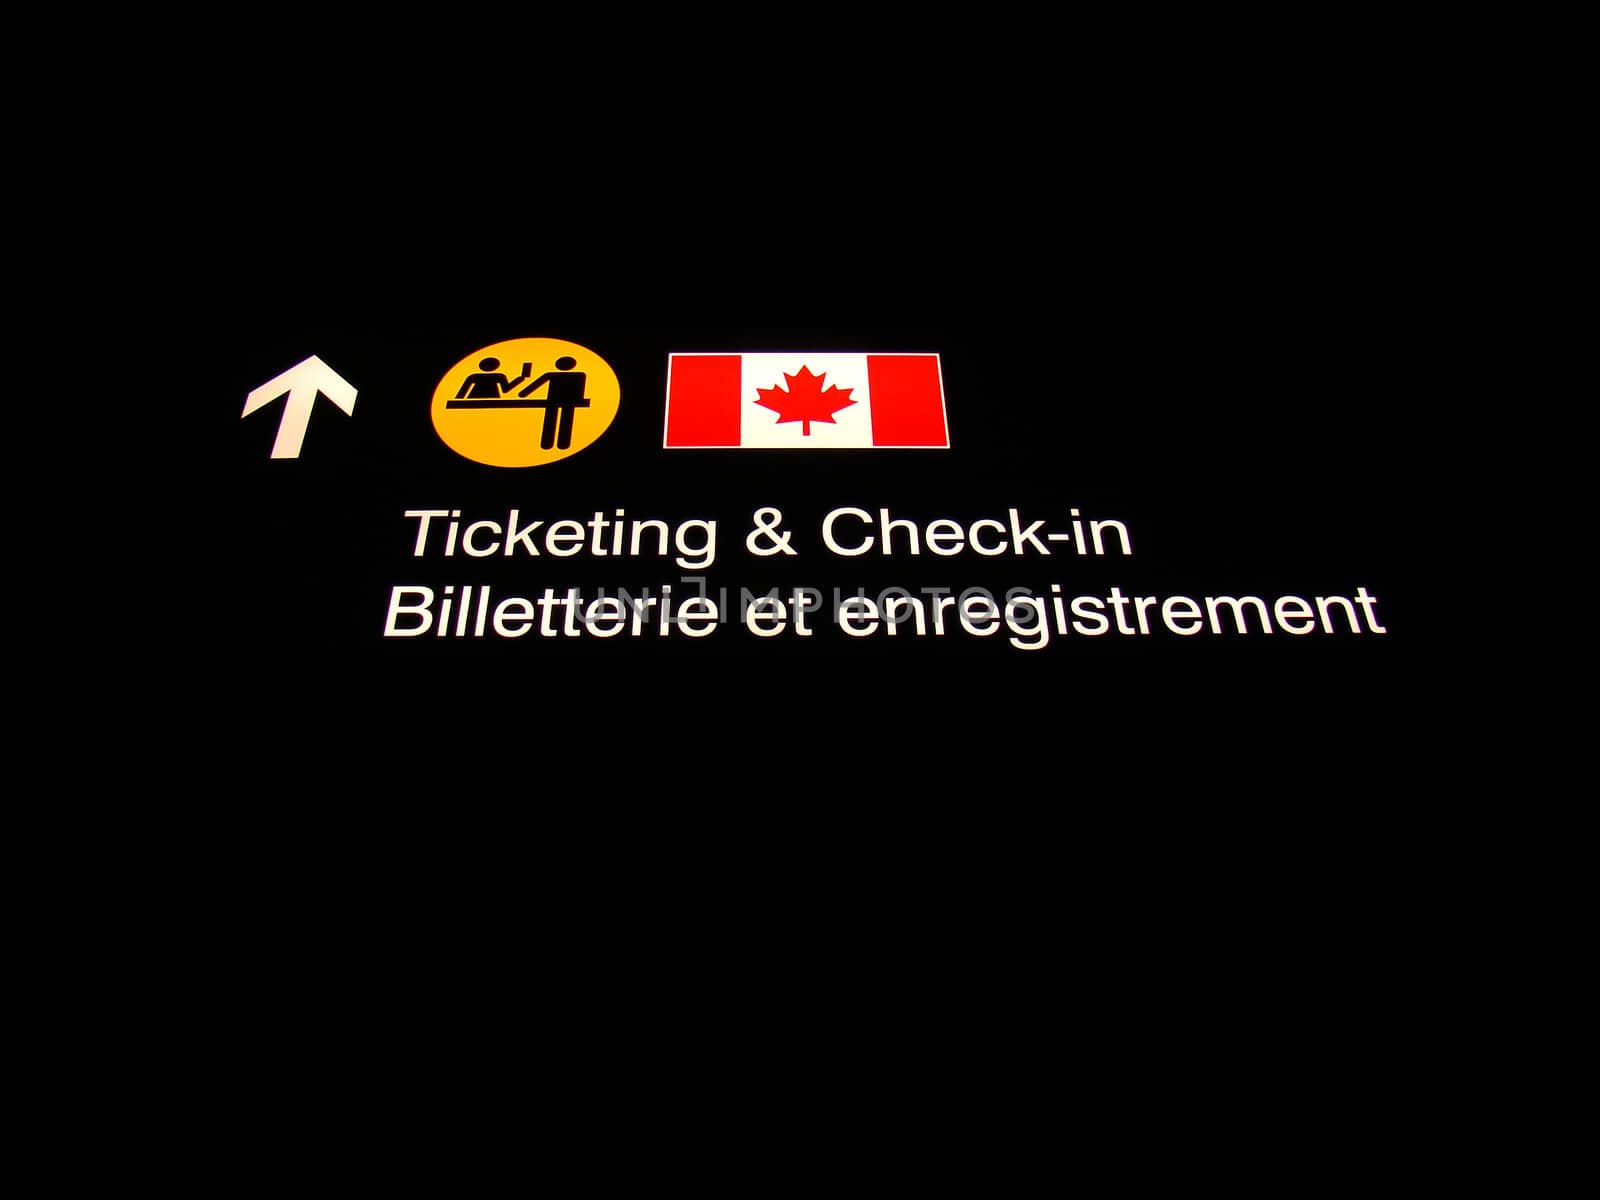 Ticketing and check-in sign at Canadian International airport.